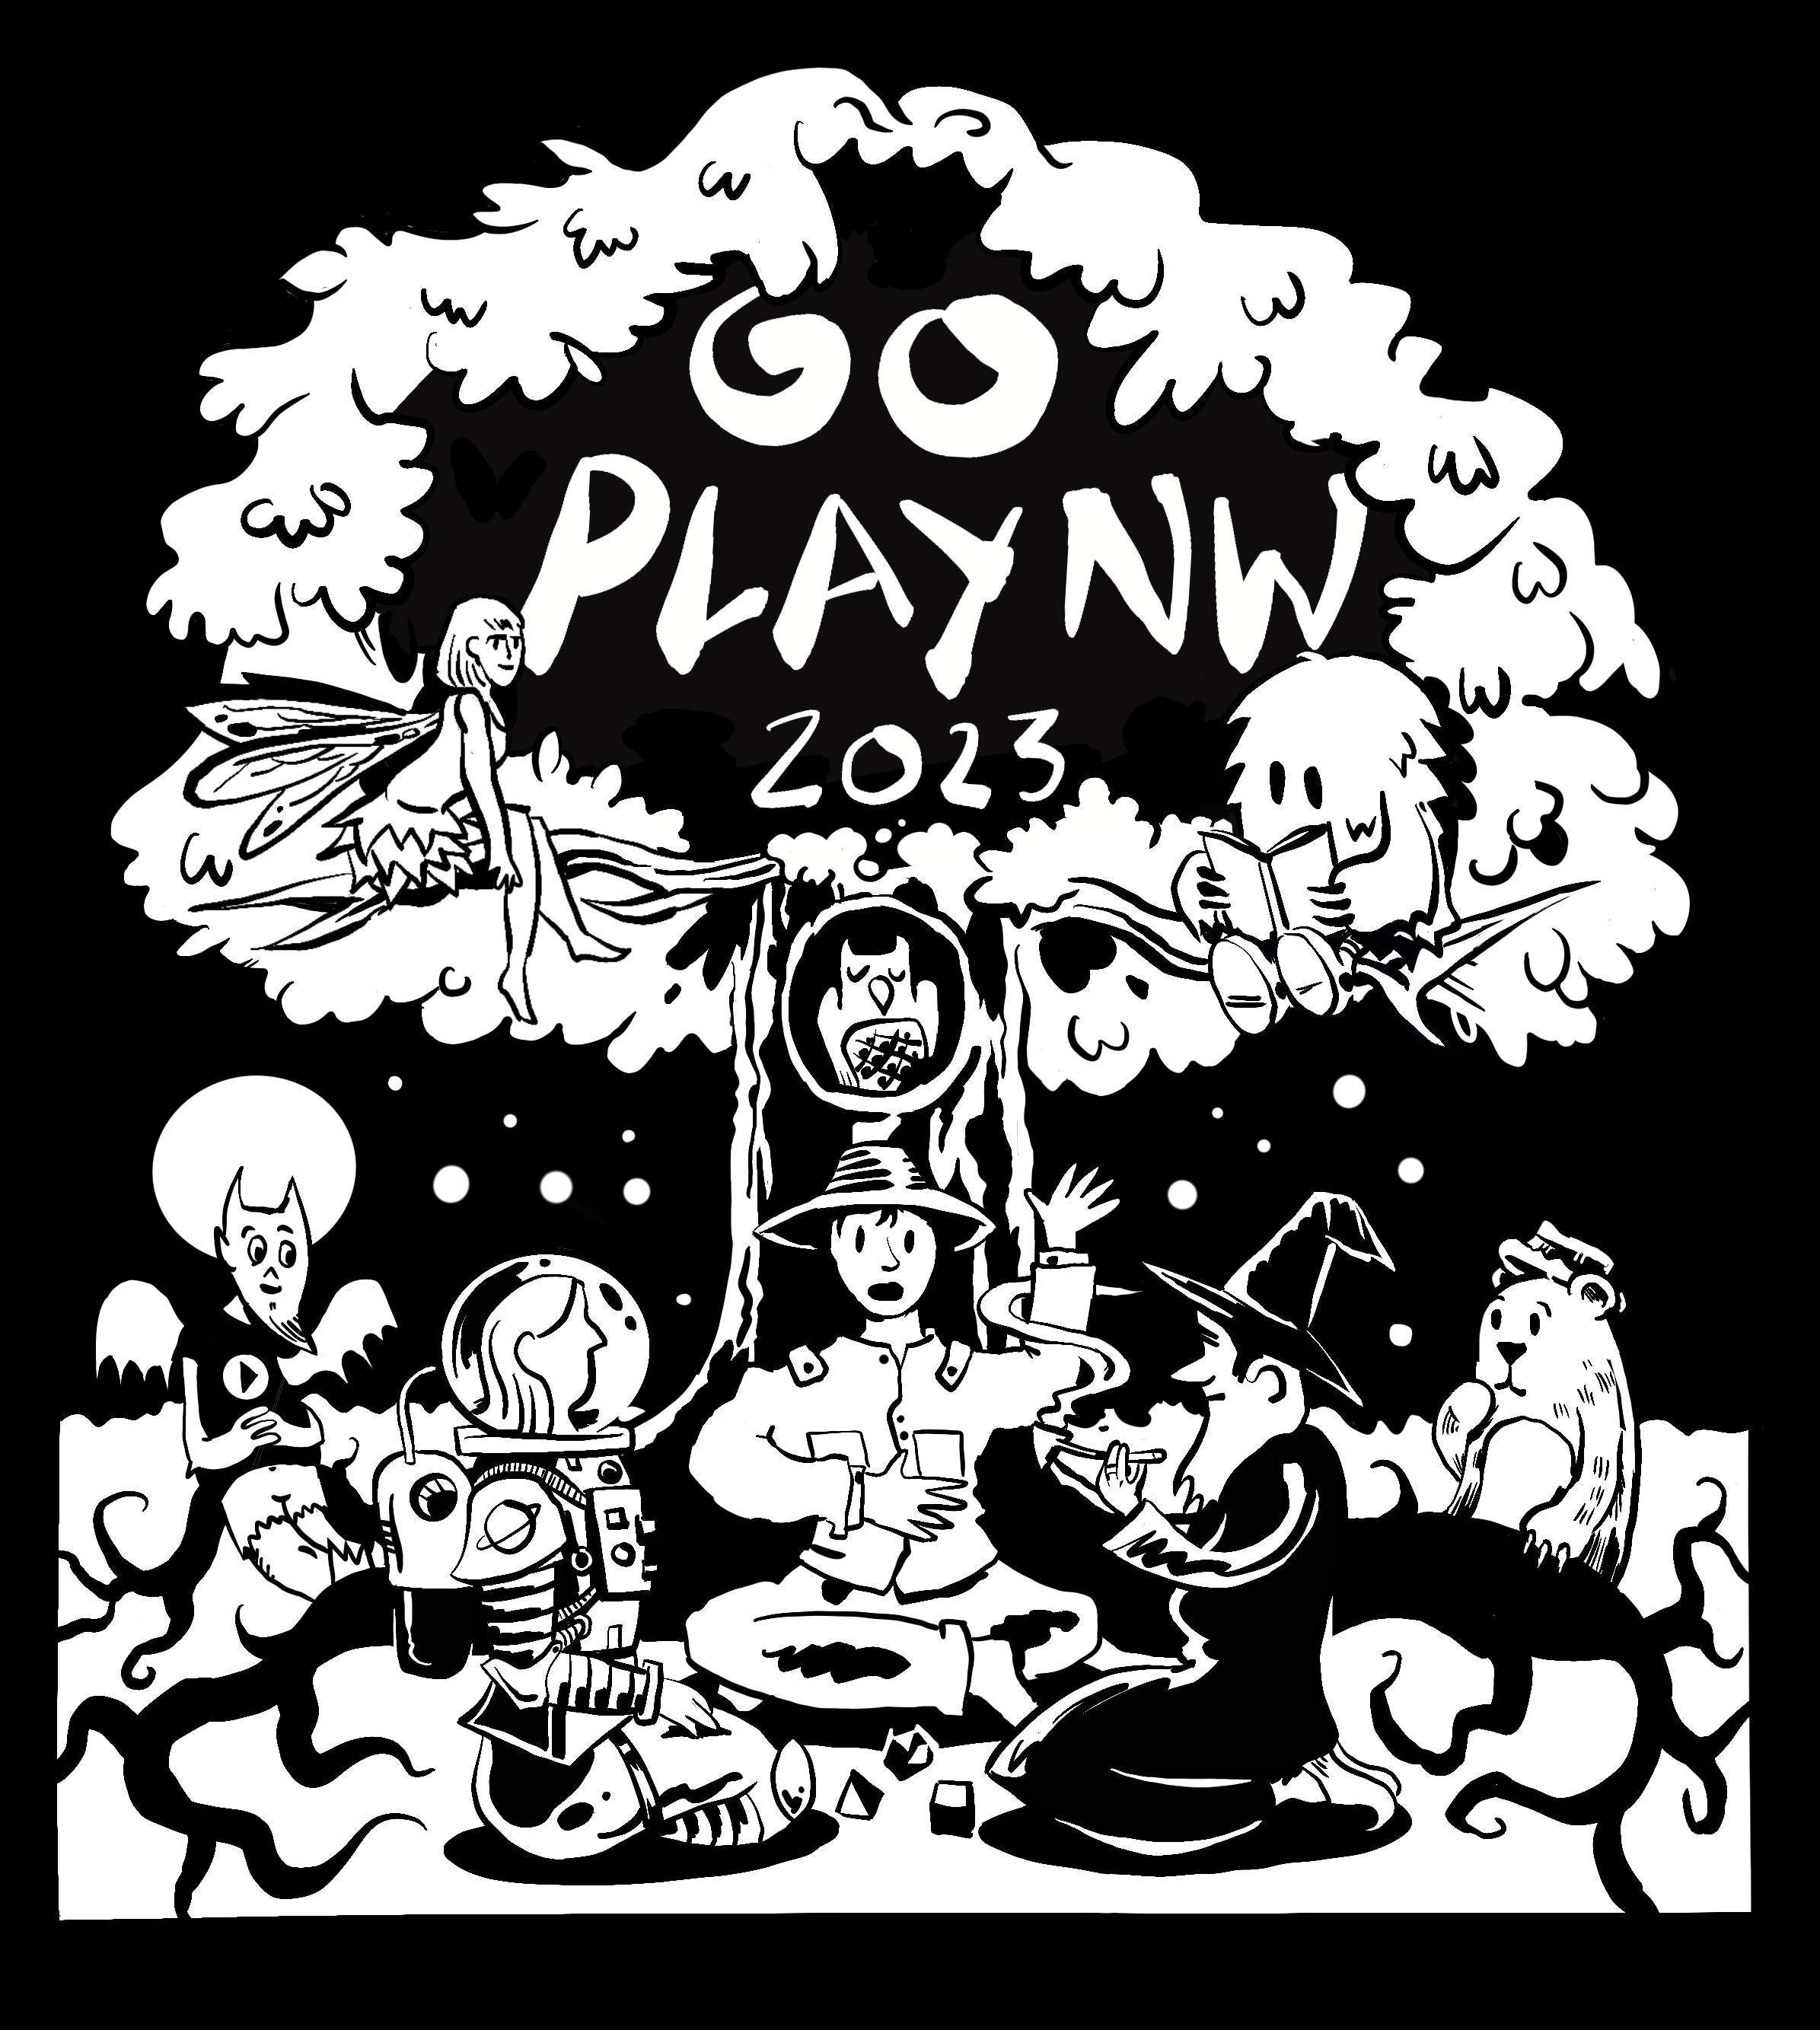 Three people gather beneath a tree to play a role-playing game—an astronaut and a wizard, with a forest ranger speaking to them. A devil with a Go Play shirt and a Honey Heist bear look on, while above them in the tree sit a fairy and Go Play NW’s mascot monster Go, reading a book.